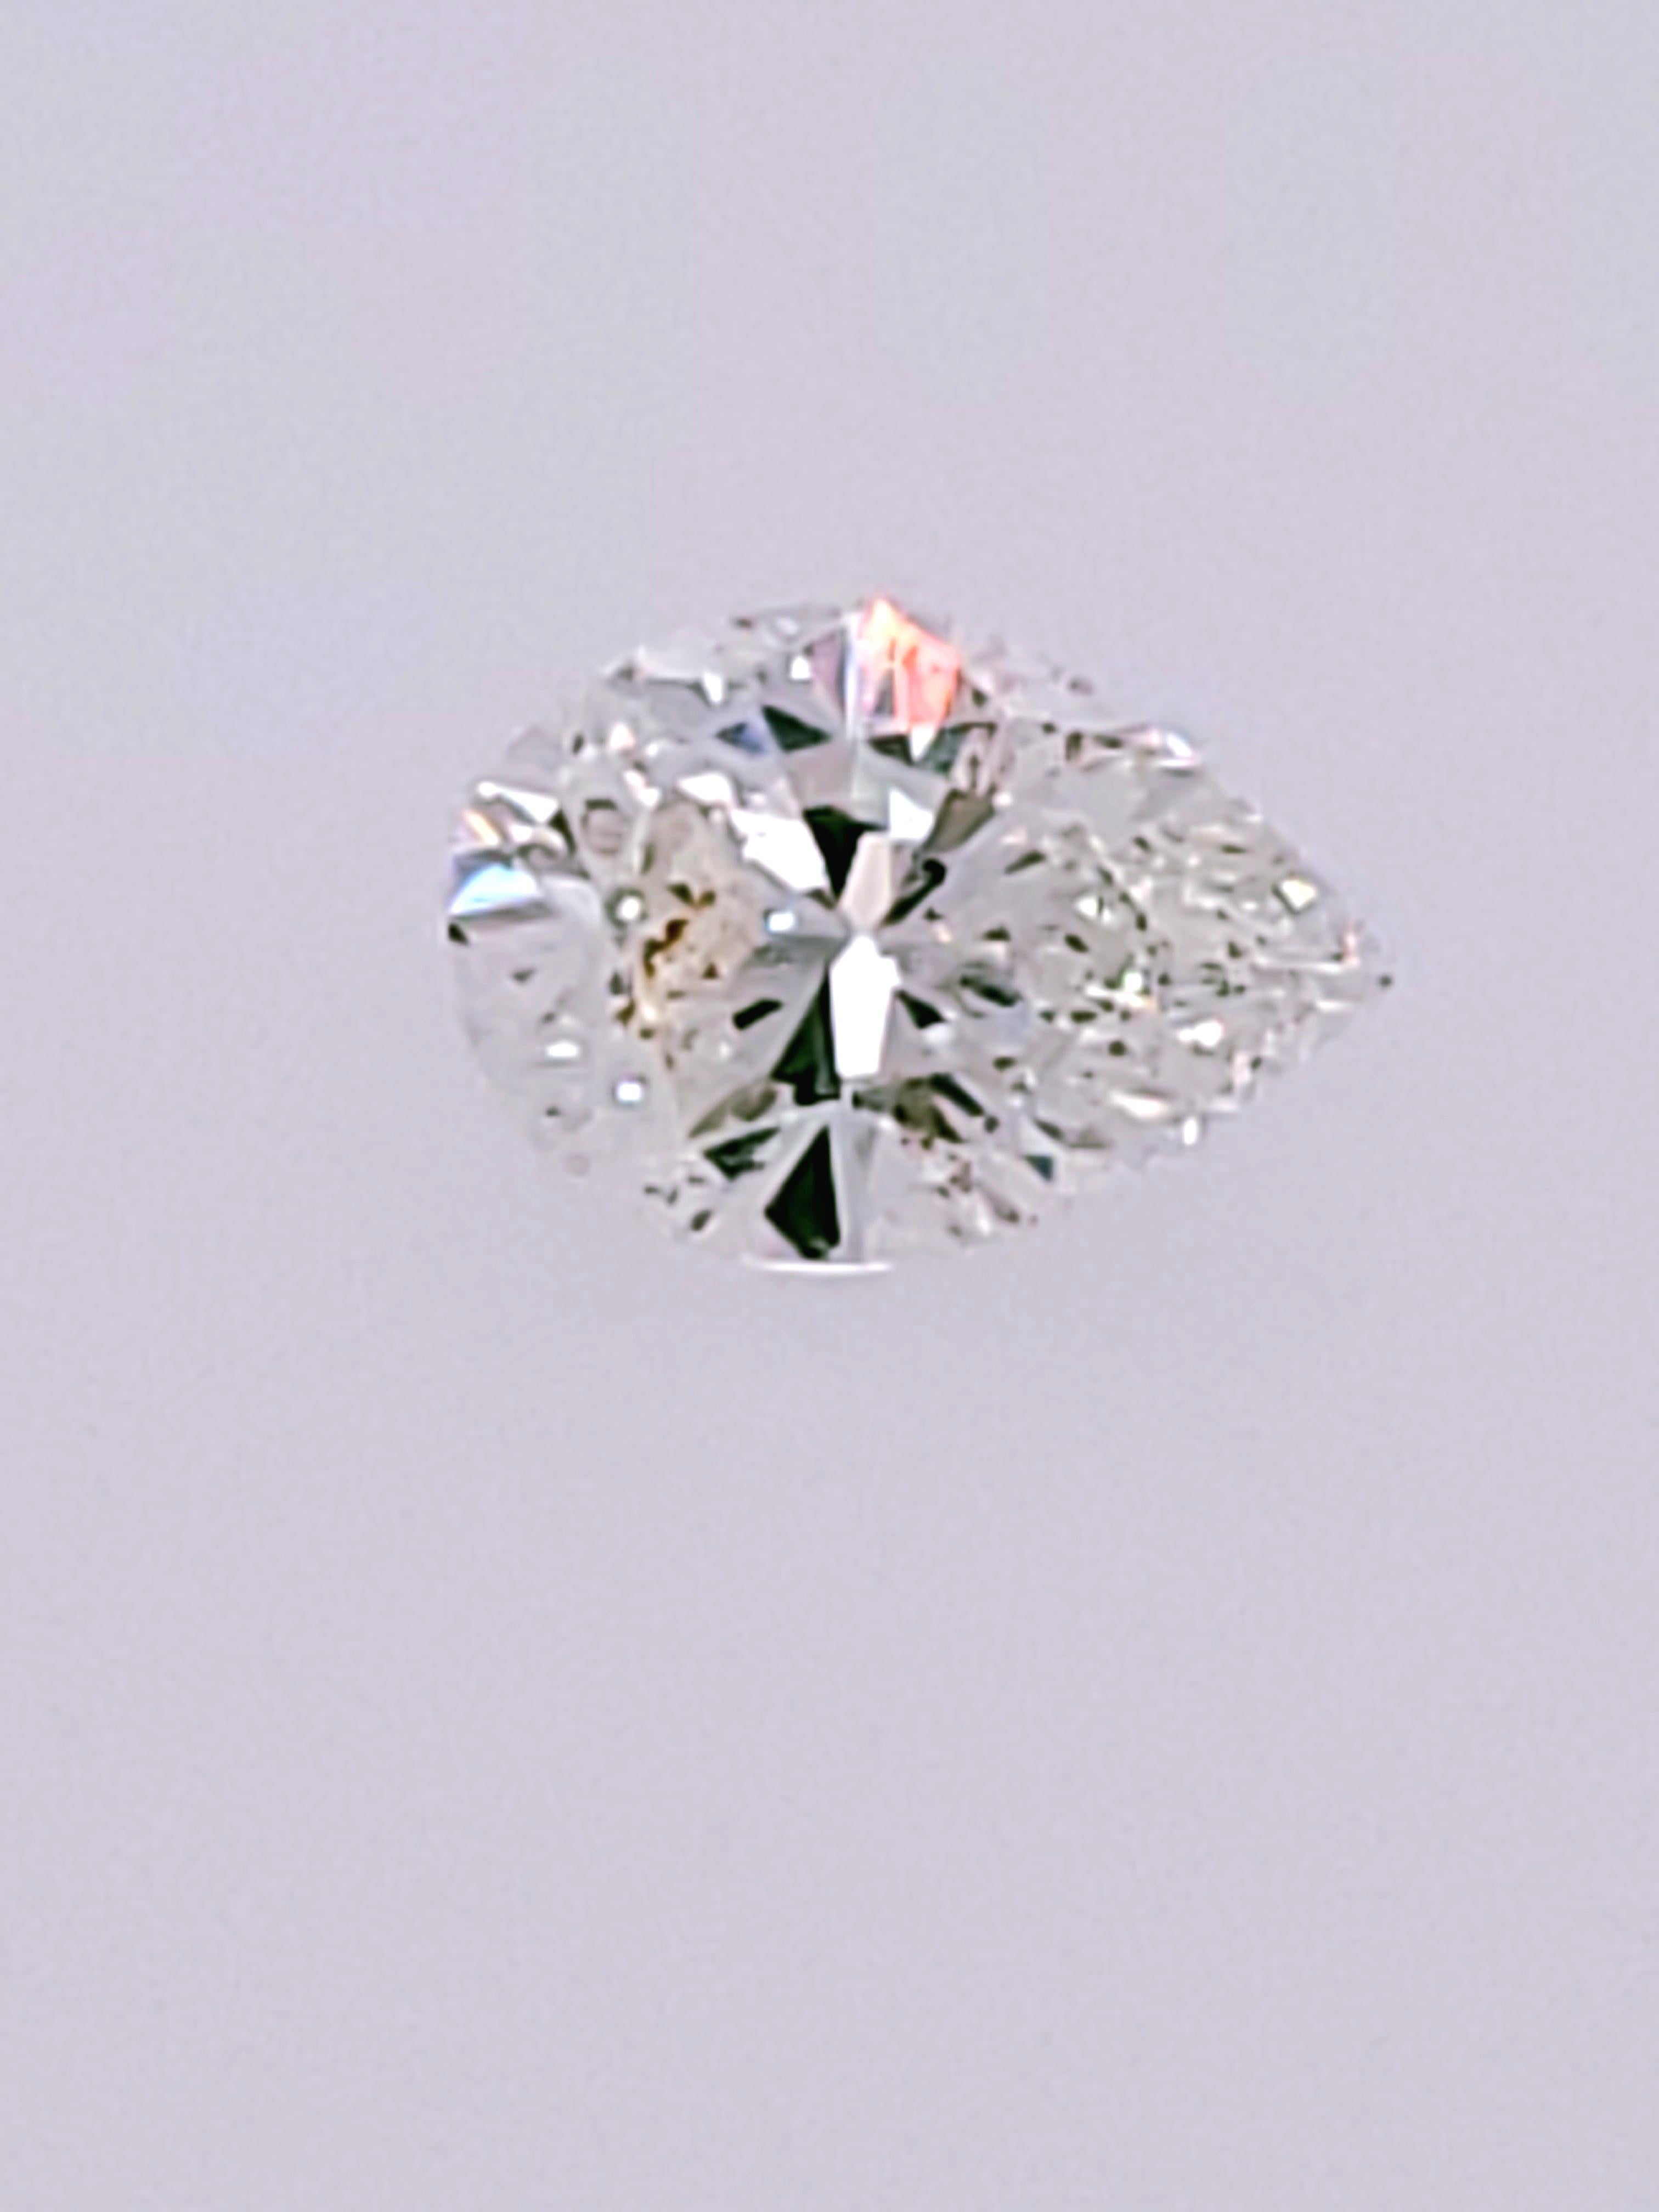 Here is another items pulled from the back of our vault and hasn't seen the light of day for decades.   This 0.71ctt, Pear Shaped Diamond, has a Clarity of SI2-SI3 and a Color of H/I.  It was set in an engagement setting in the past but when the